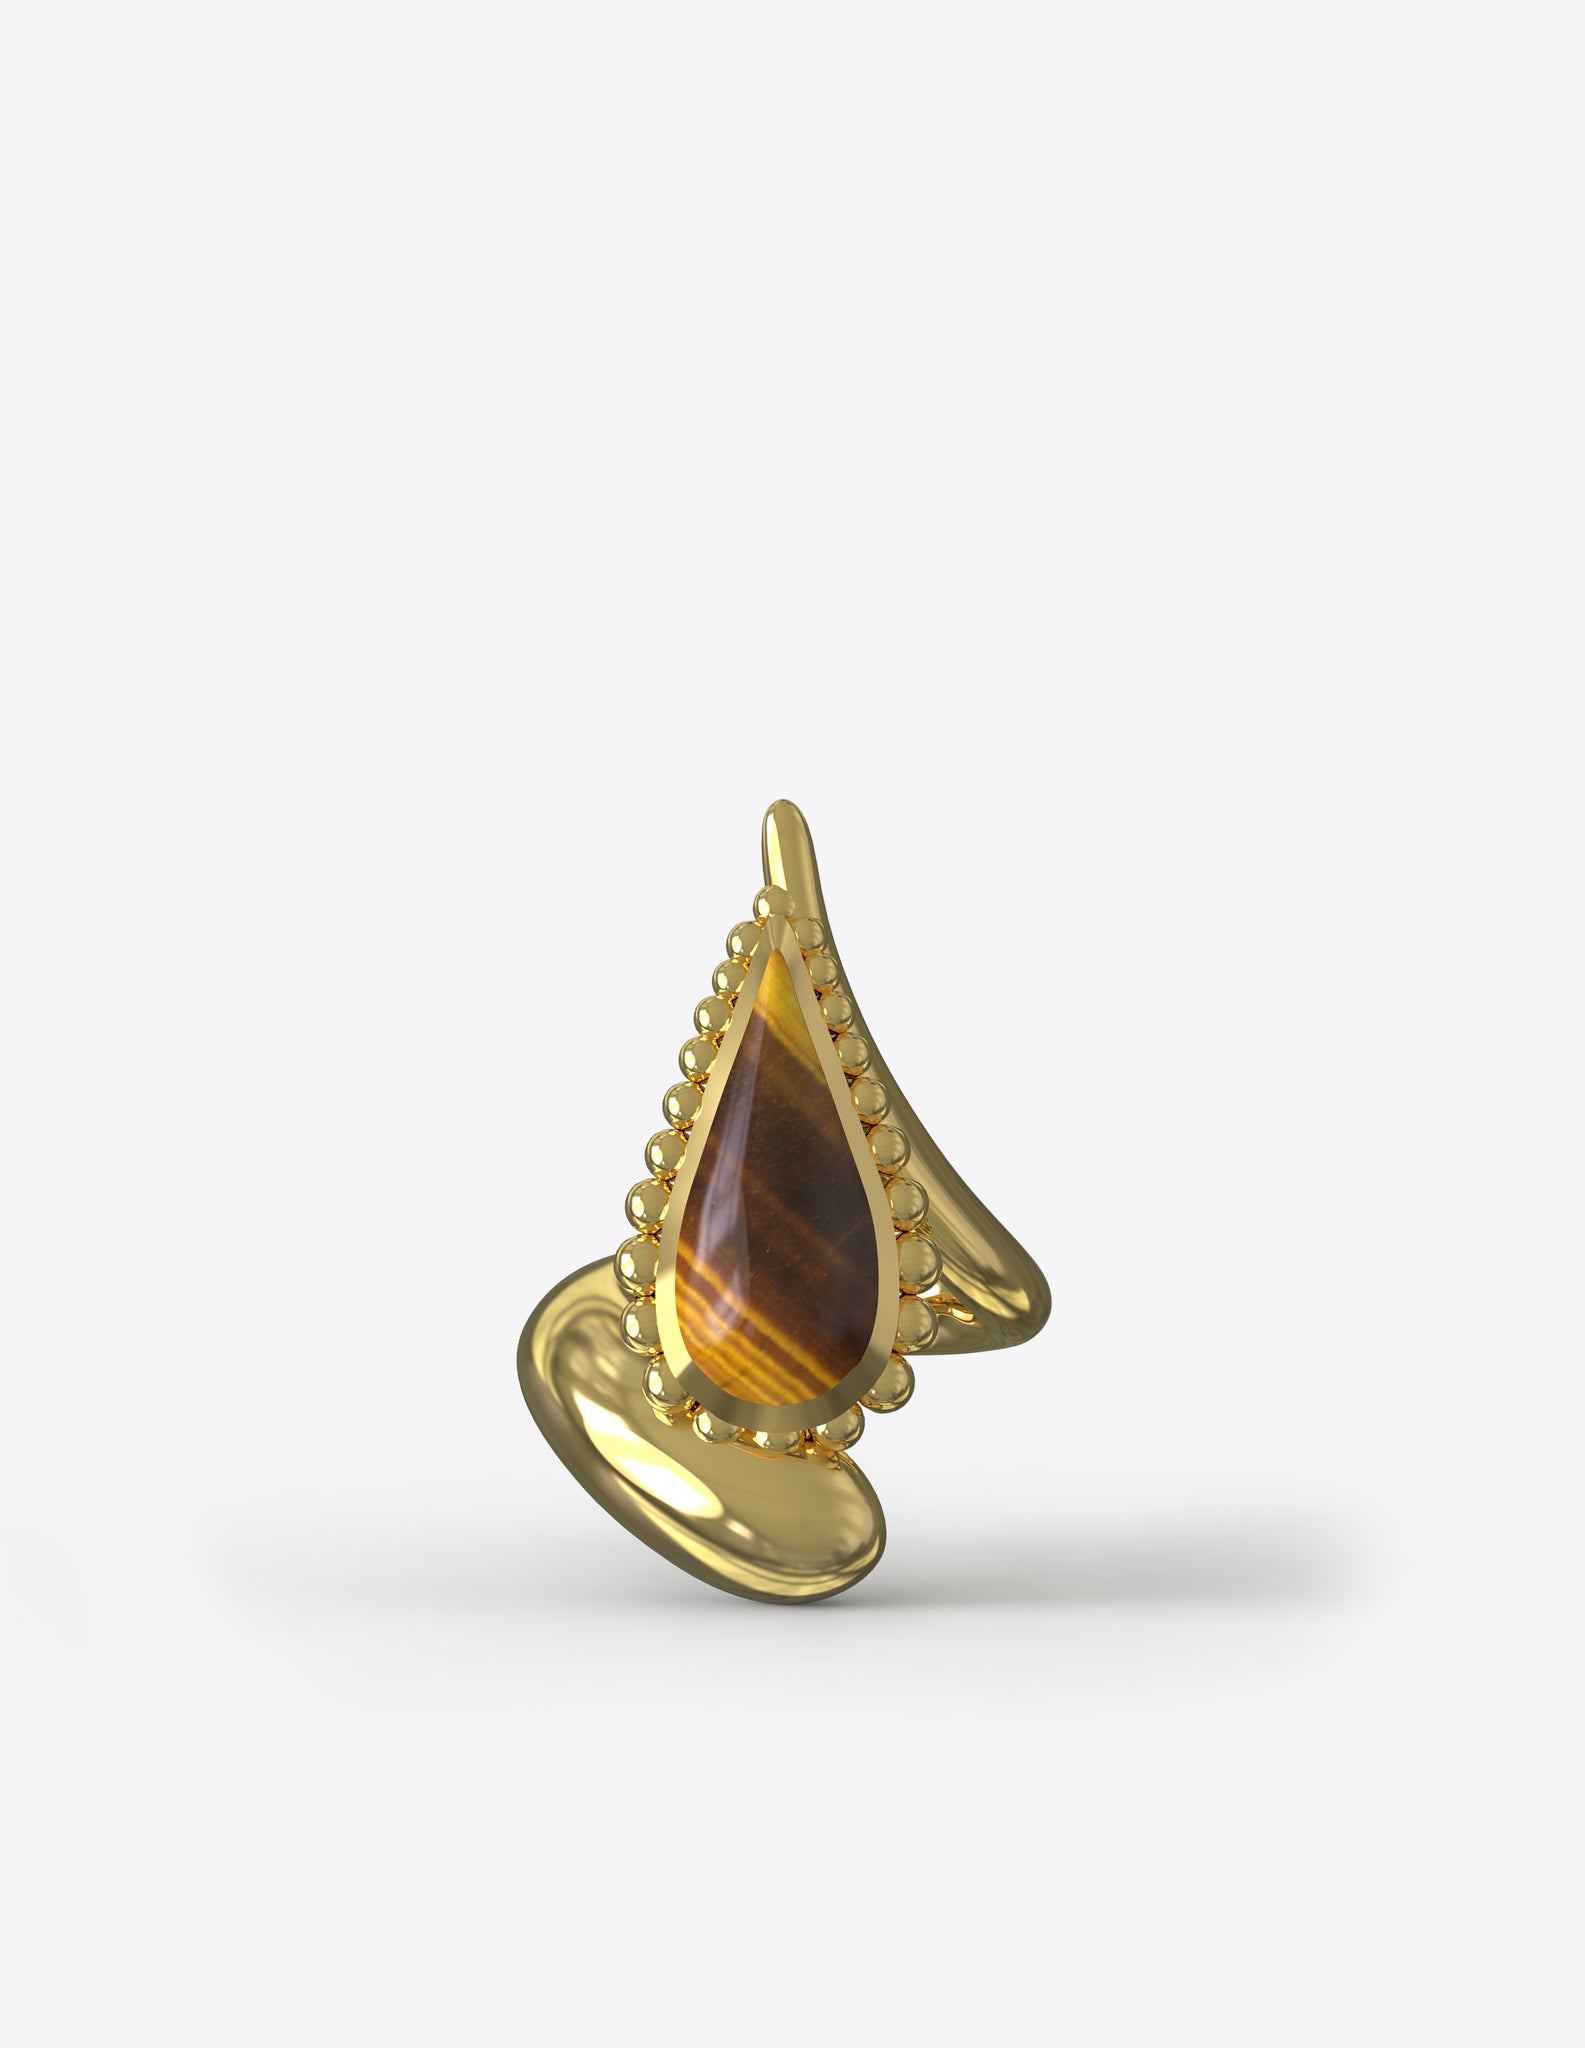 Compass Ring in Polished Gold Vermeil with Tiger Eye